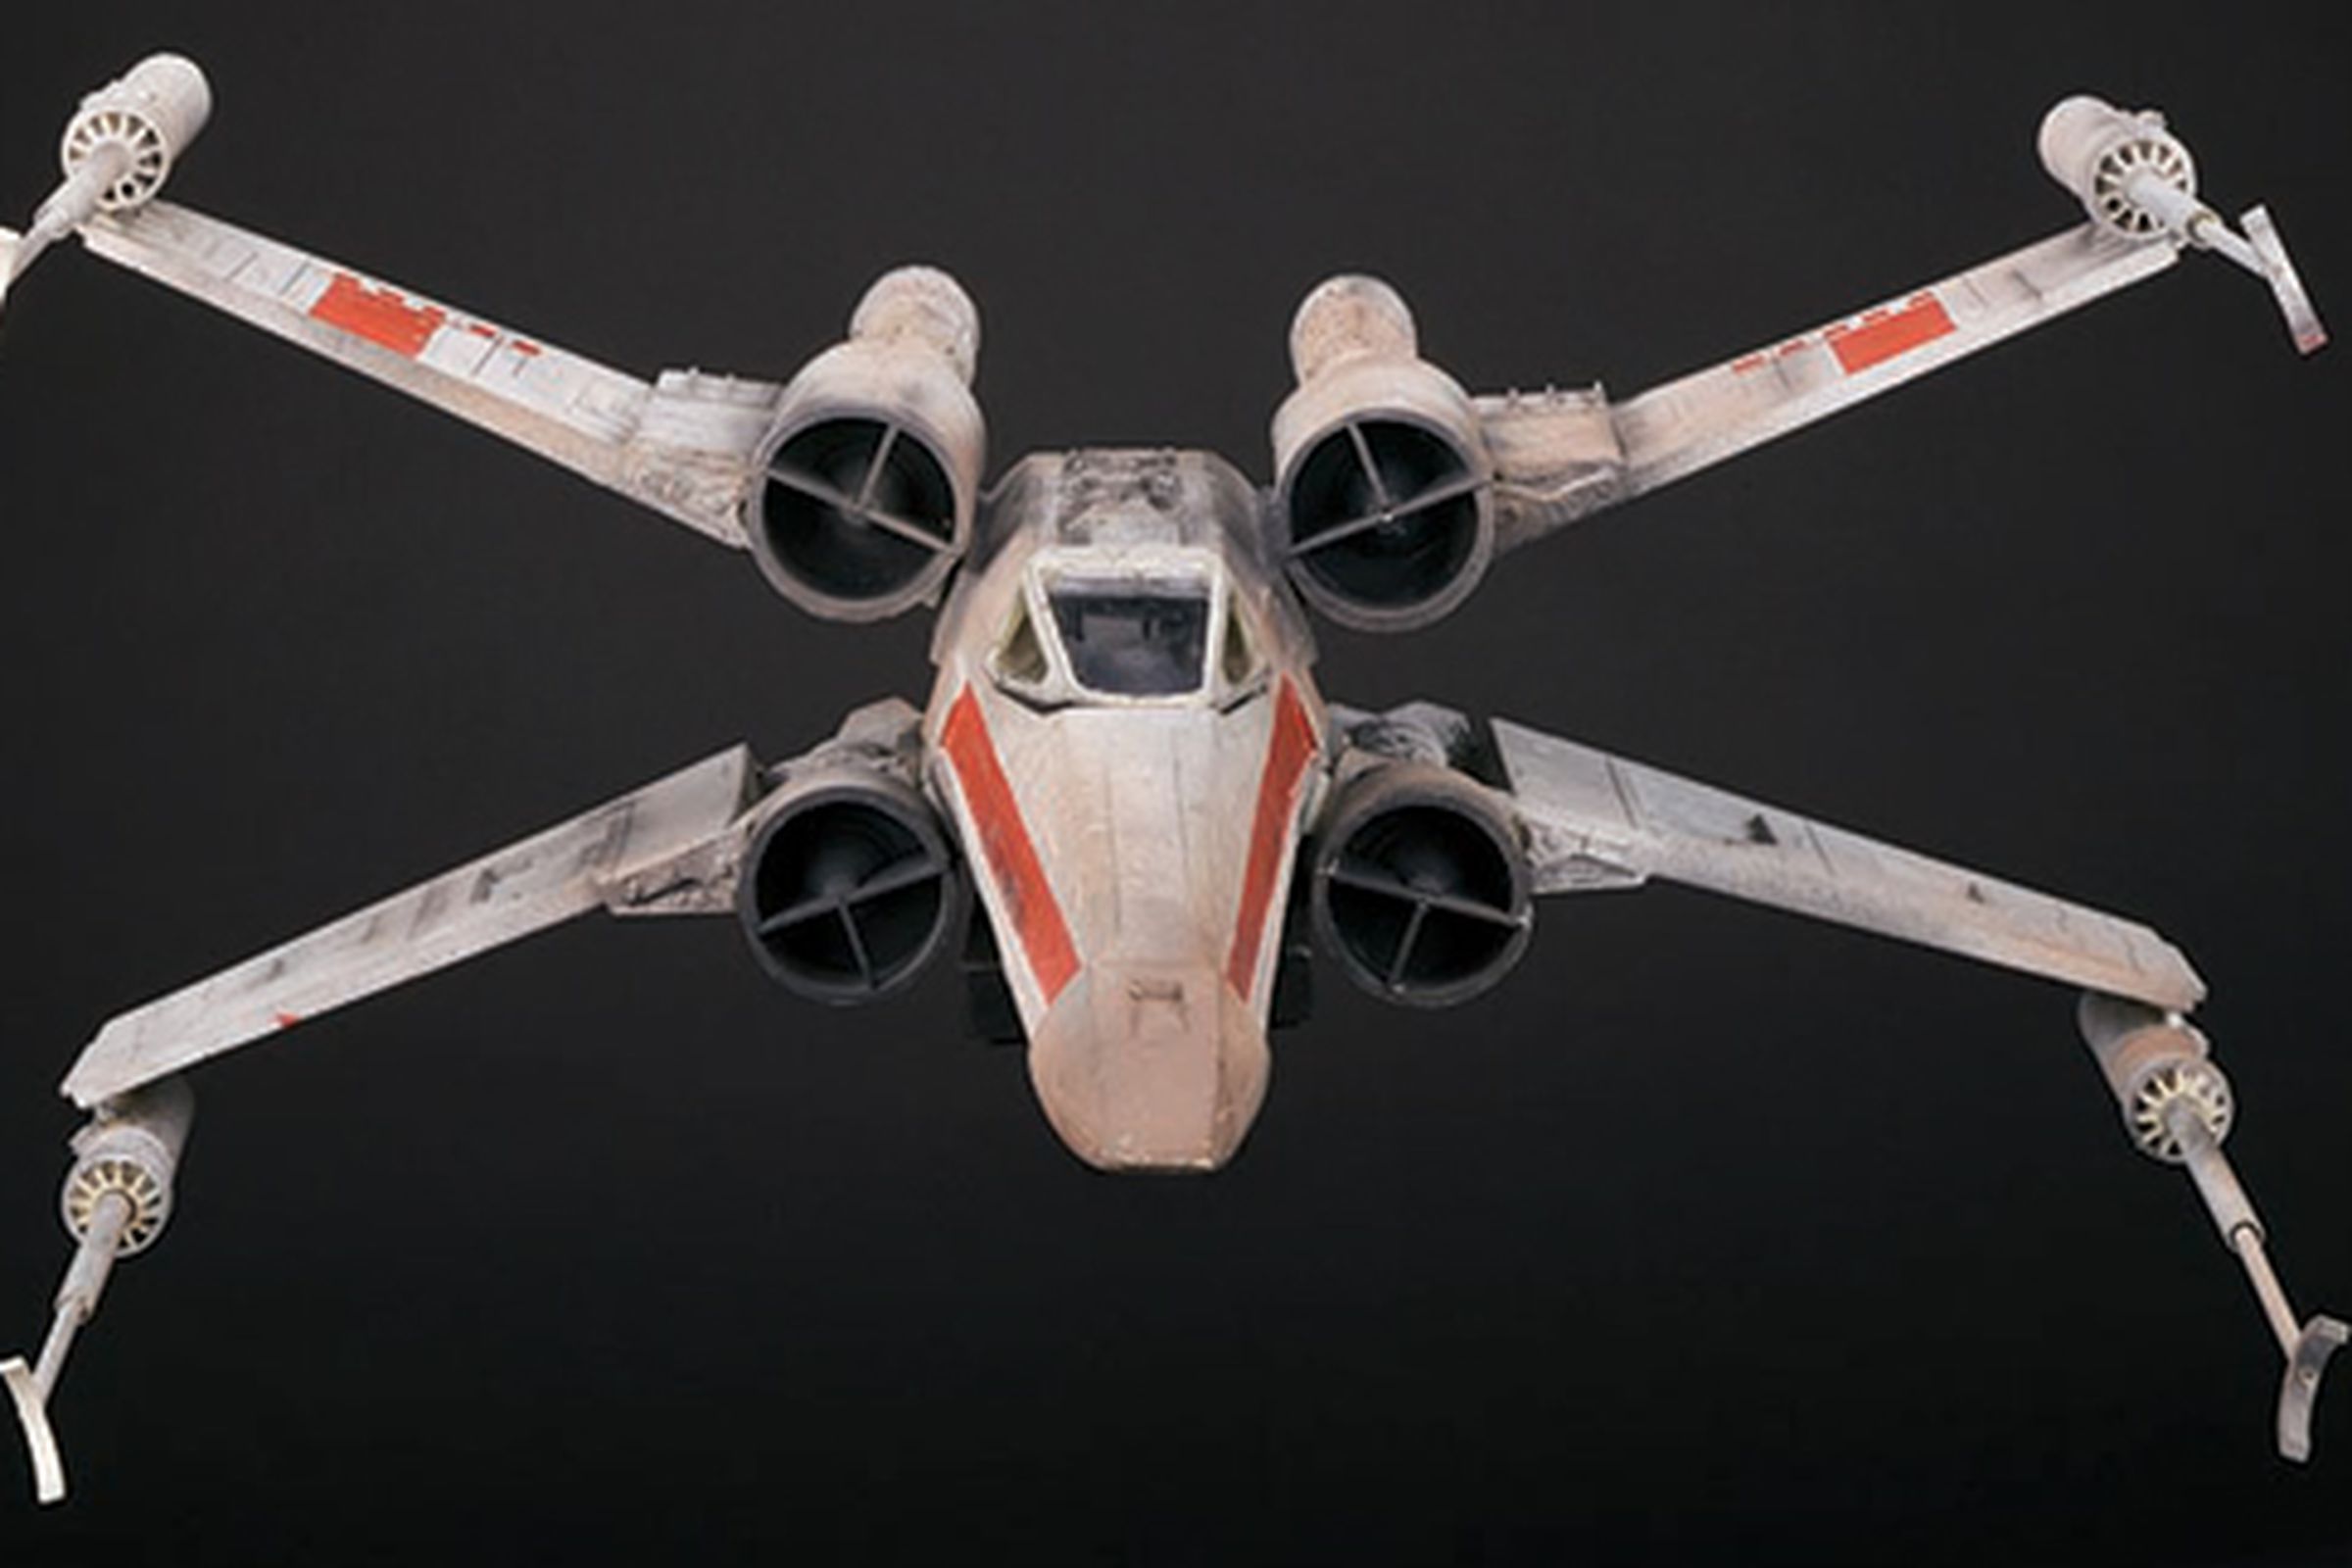 PROFILES IN HISTORY Star Wars X-Wing prop